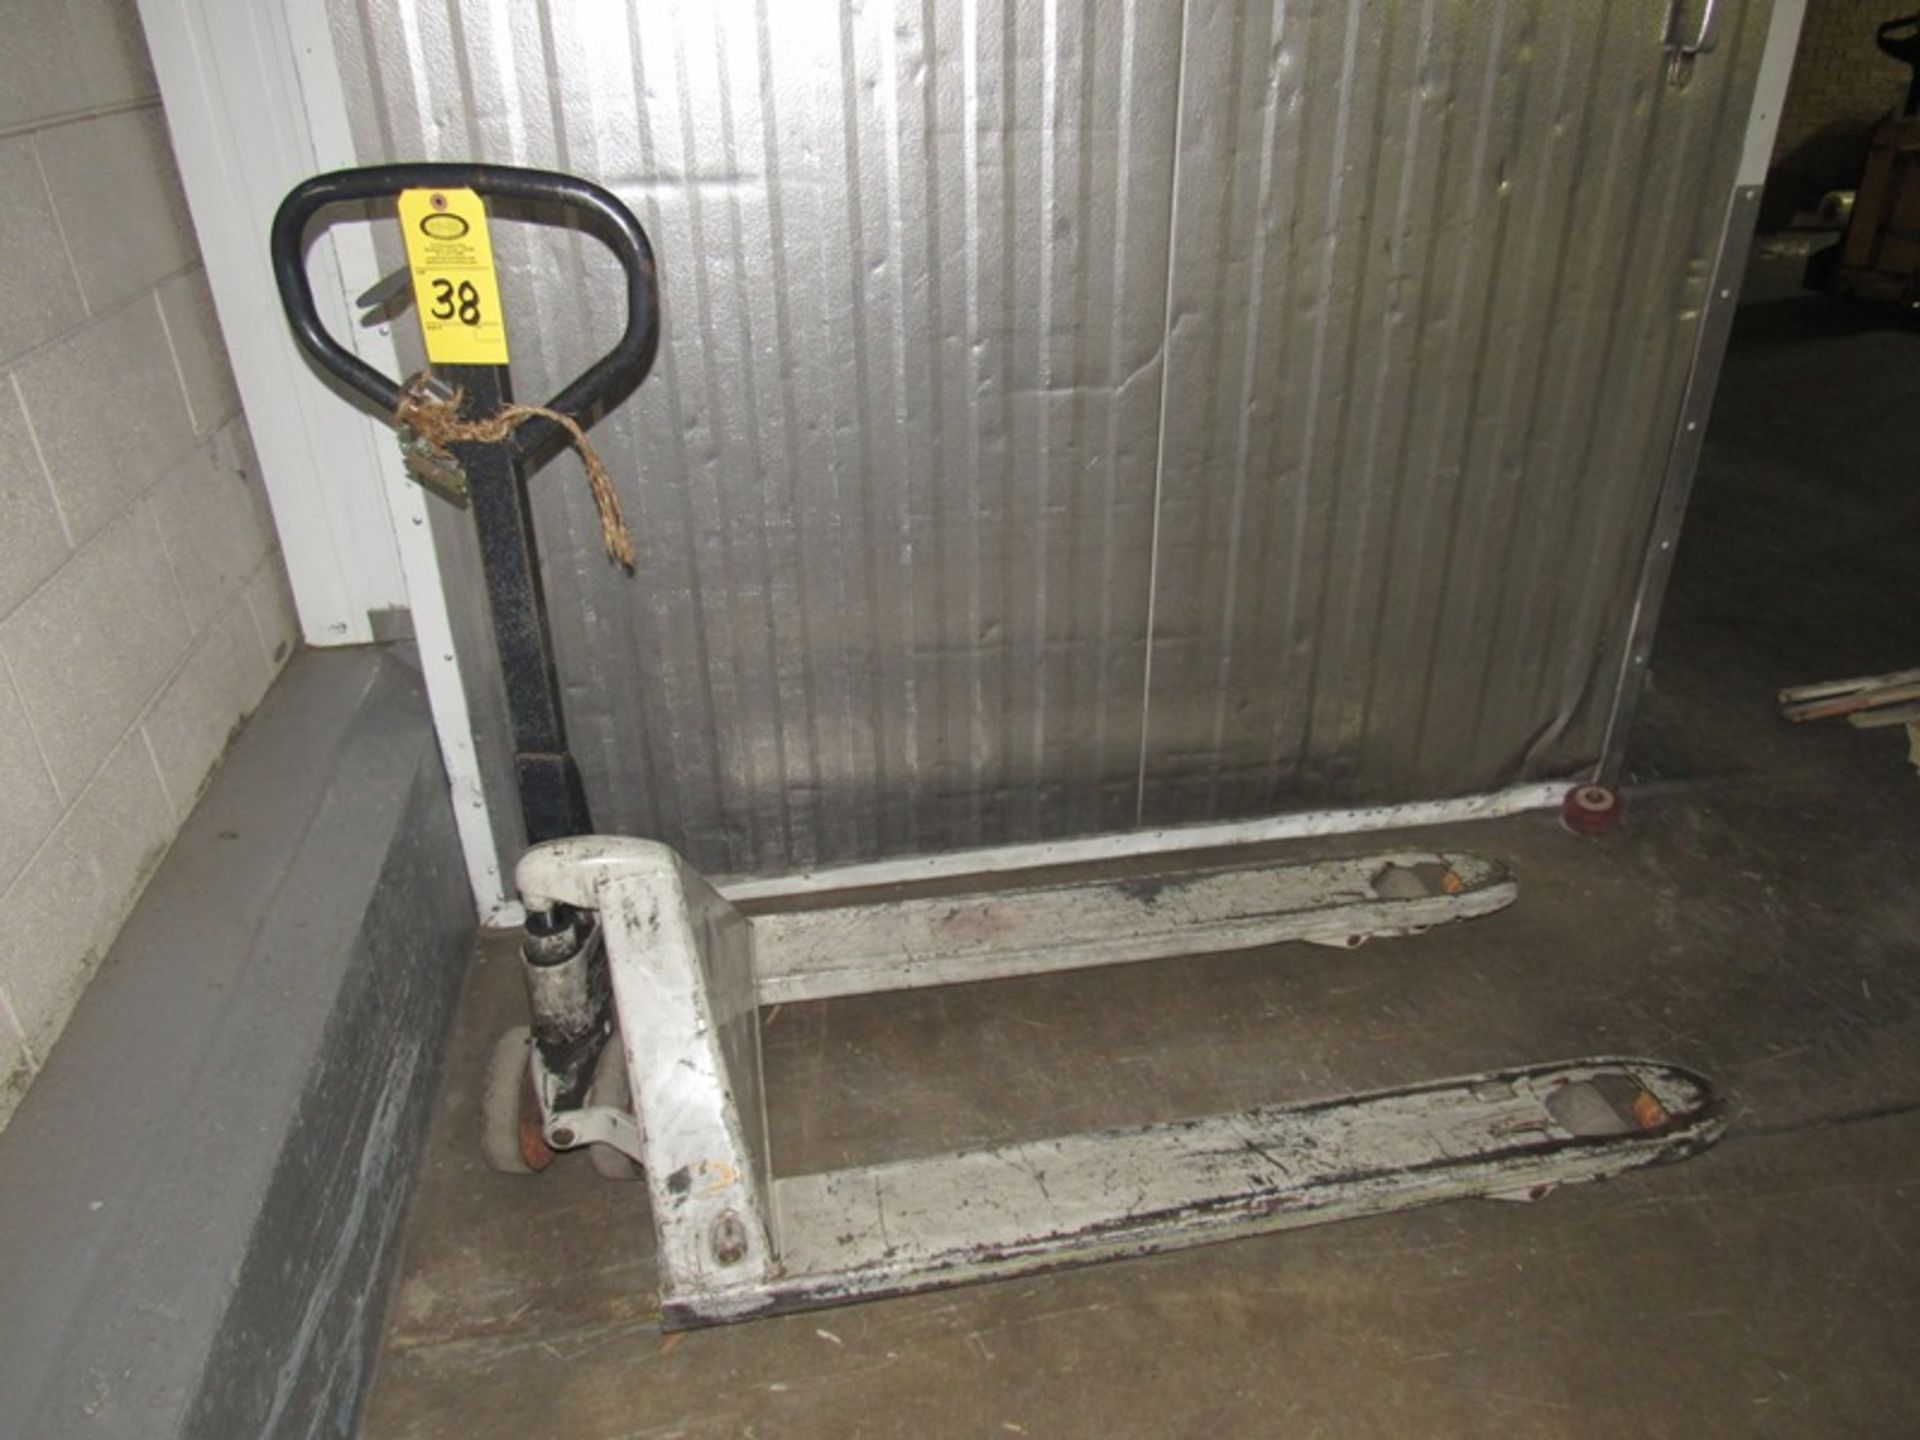 Crown Pallet Jack (Required Rigging Fee: $10 Contact Norm Pavlish at Nebraska Stainless Company